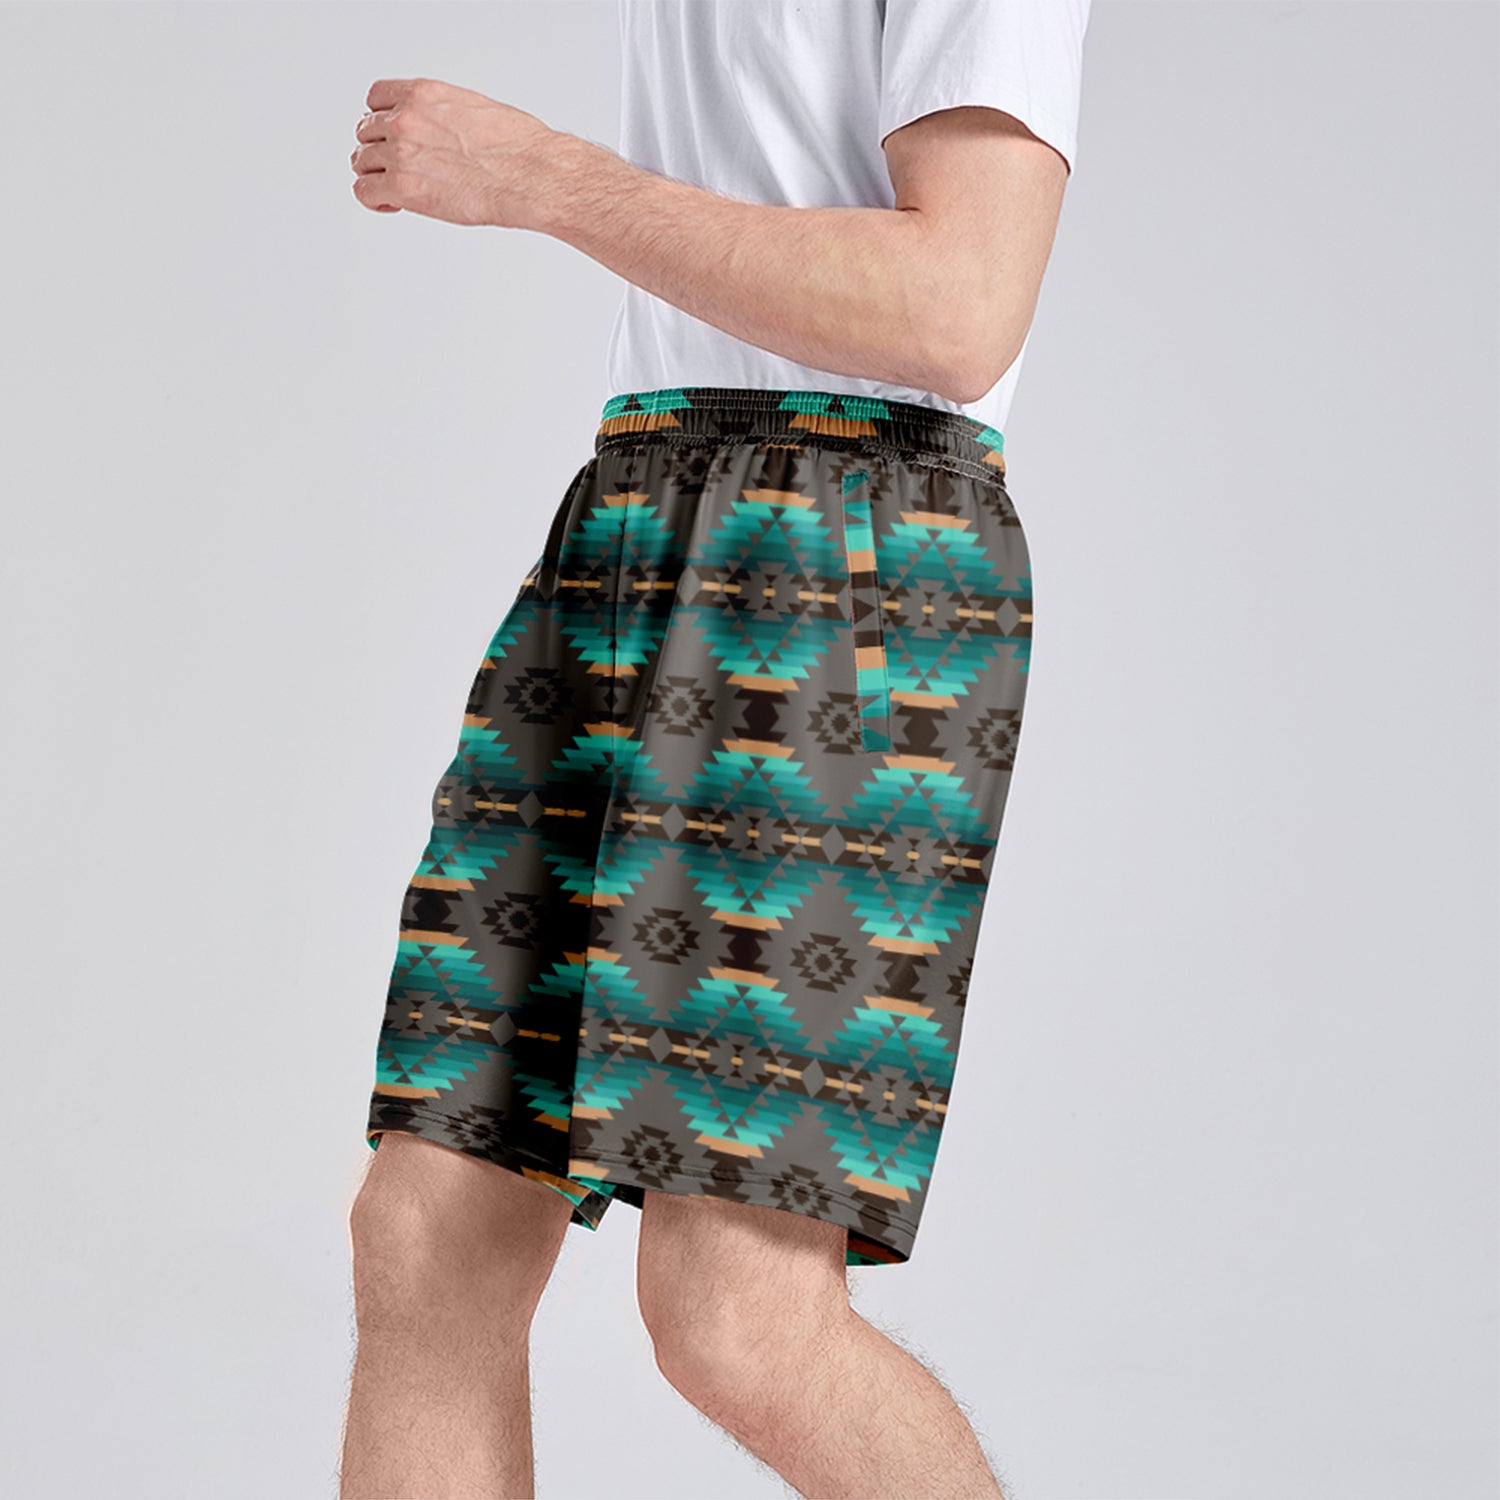 Cree Confederacy Athletic Shorts with Pockets